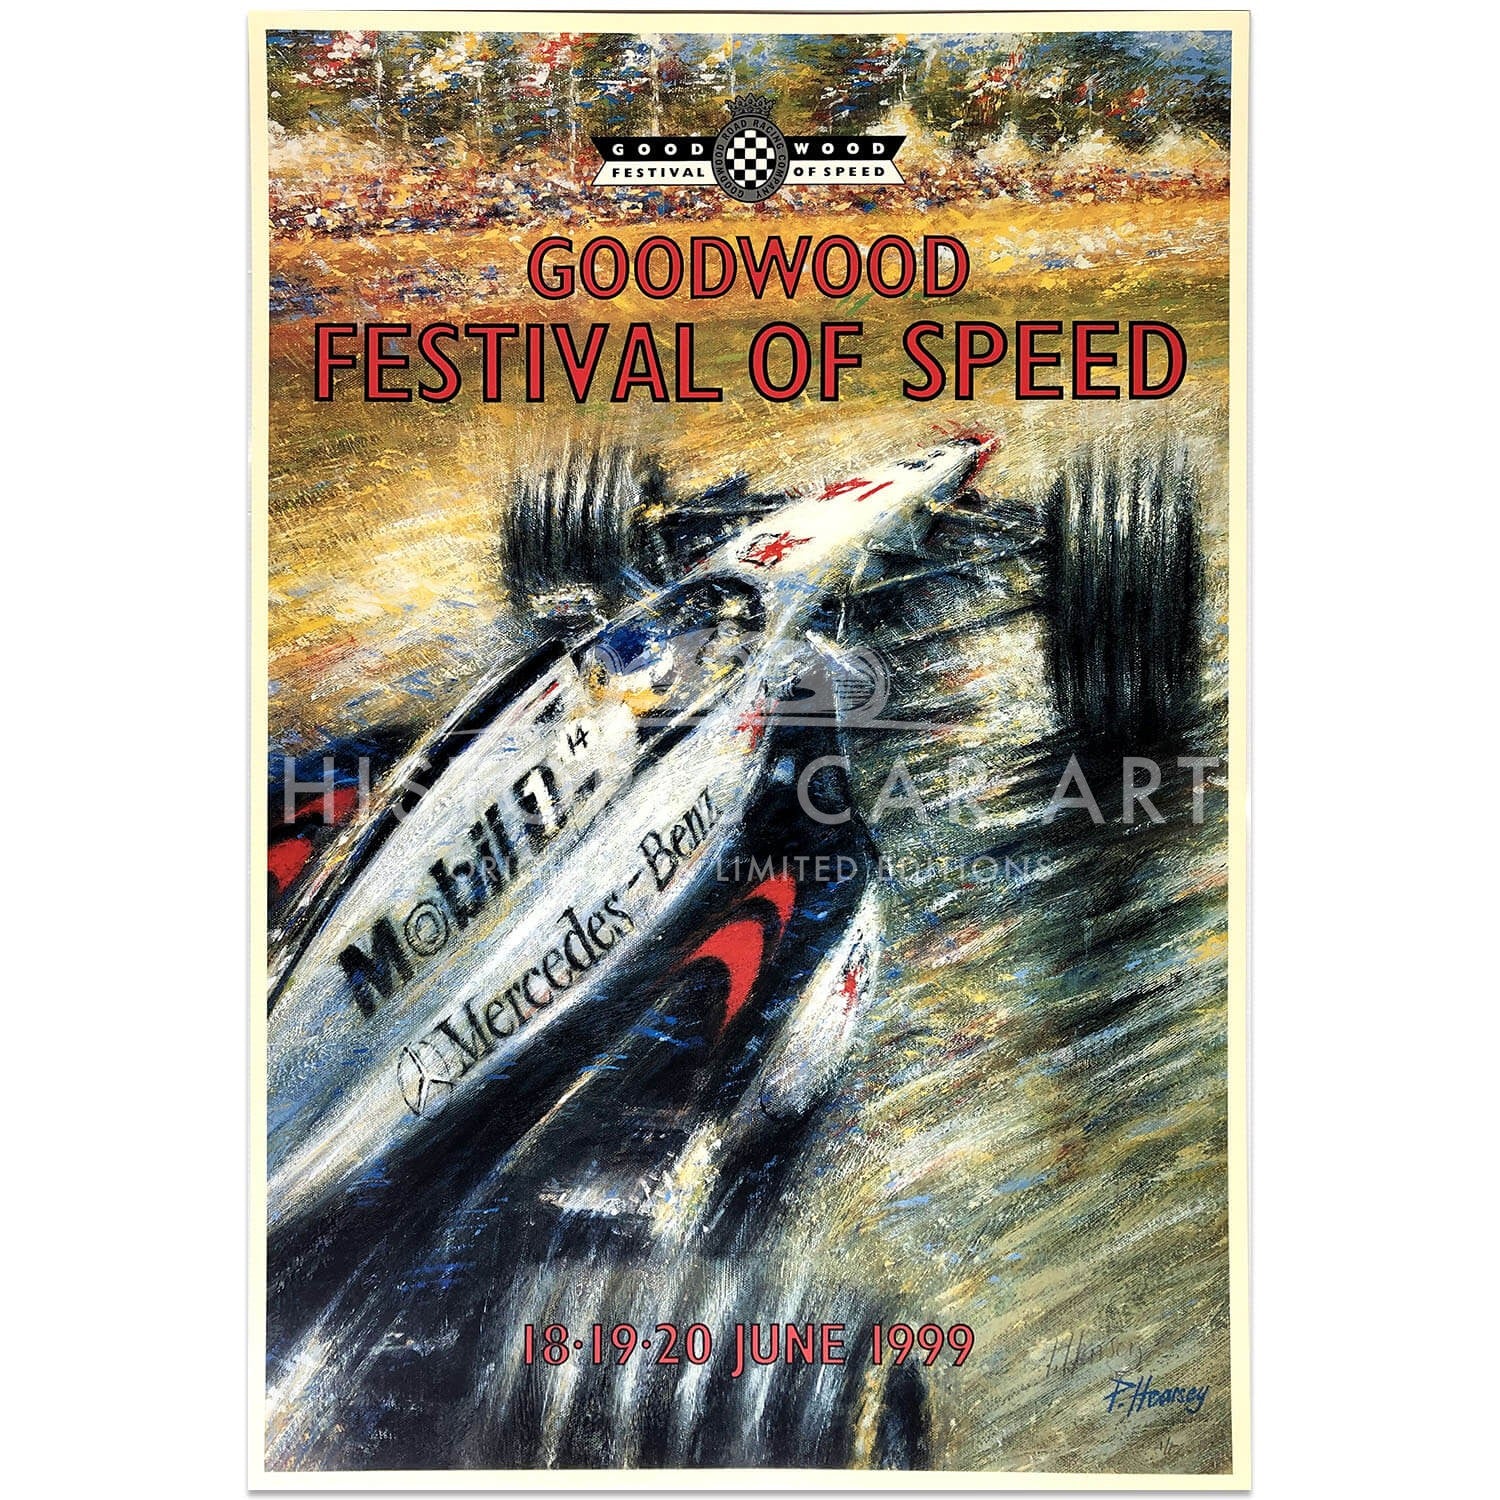 British | Goodwood Festival of Speed 1999 Poster